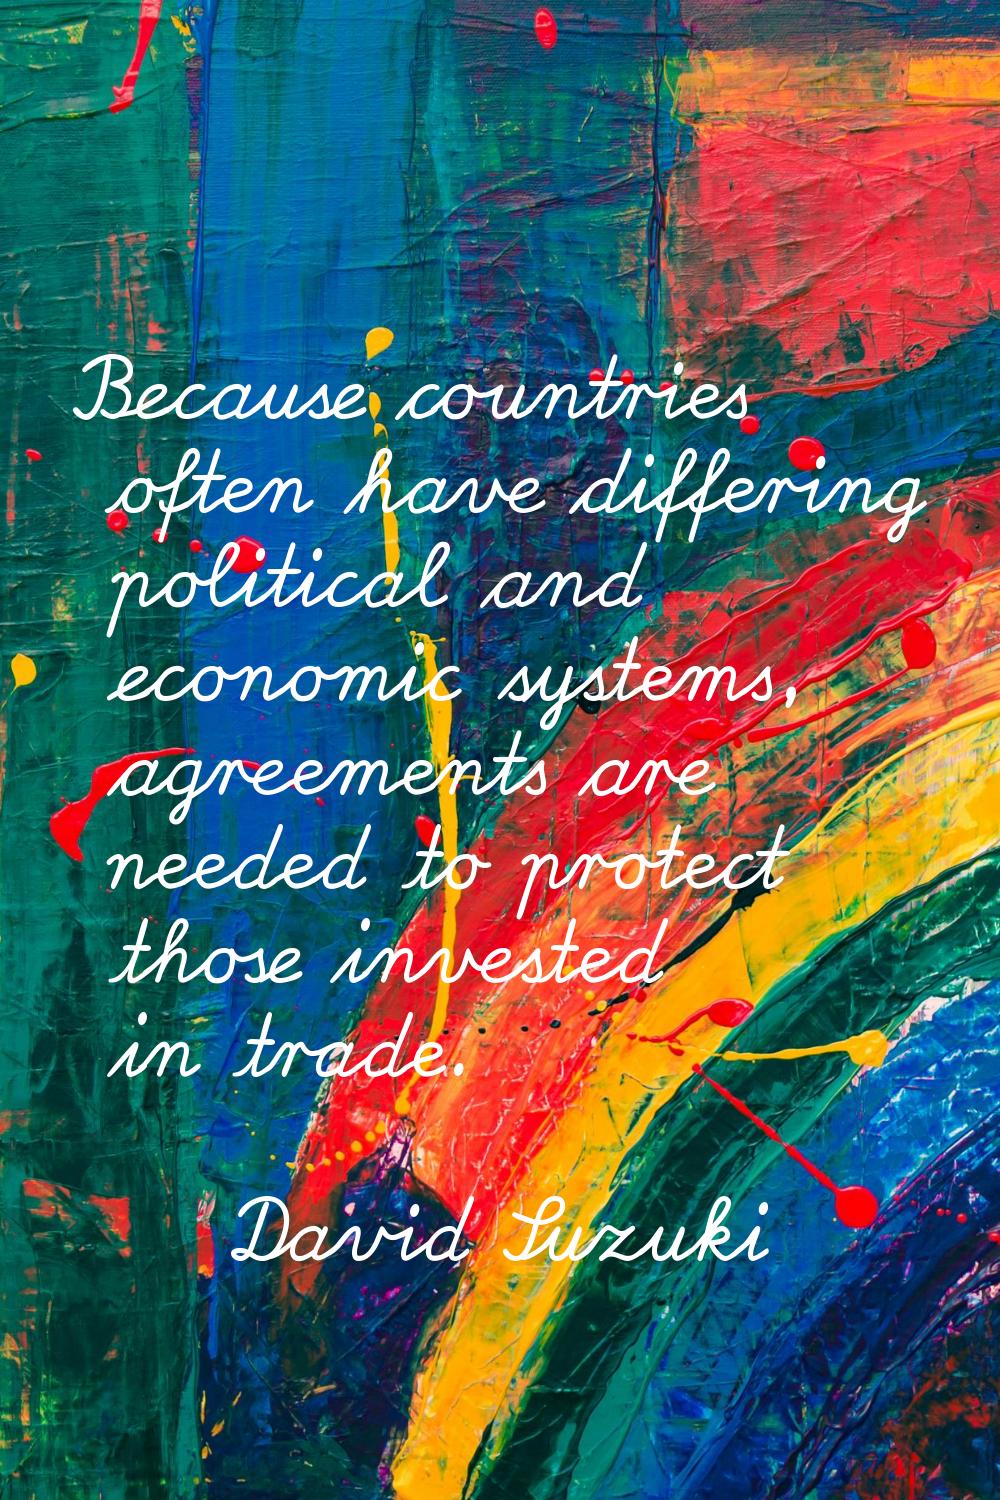 Because countries often have differing political and economic systems, agreements are needed to pro